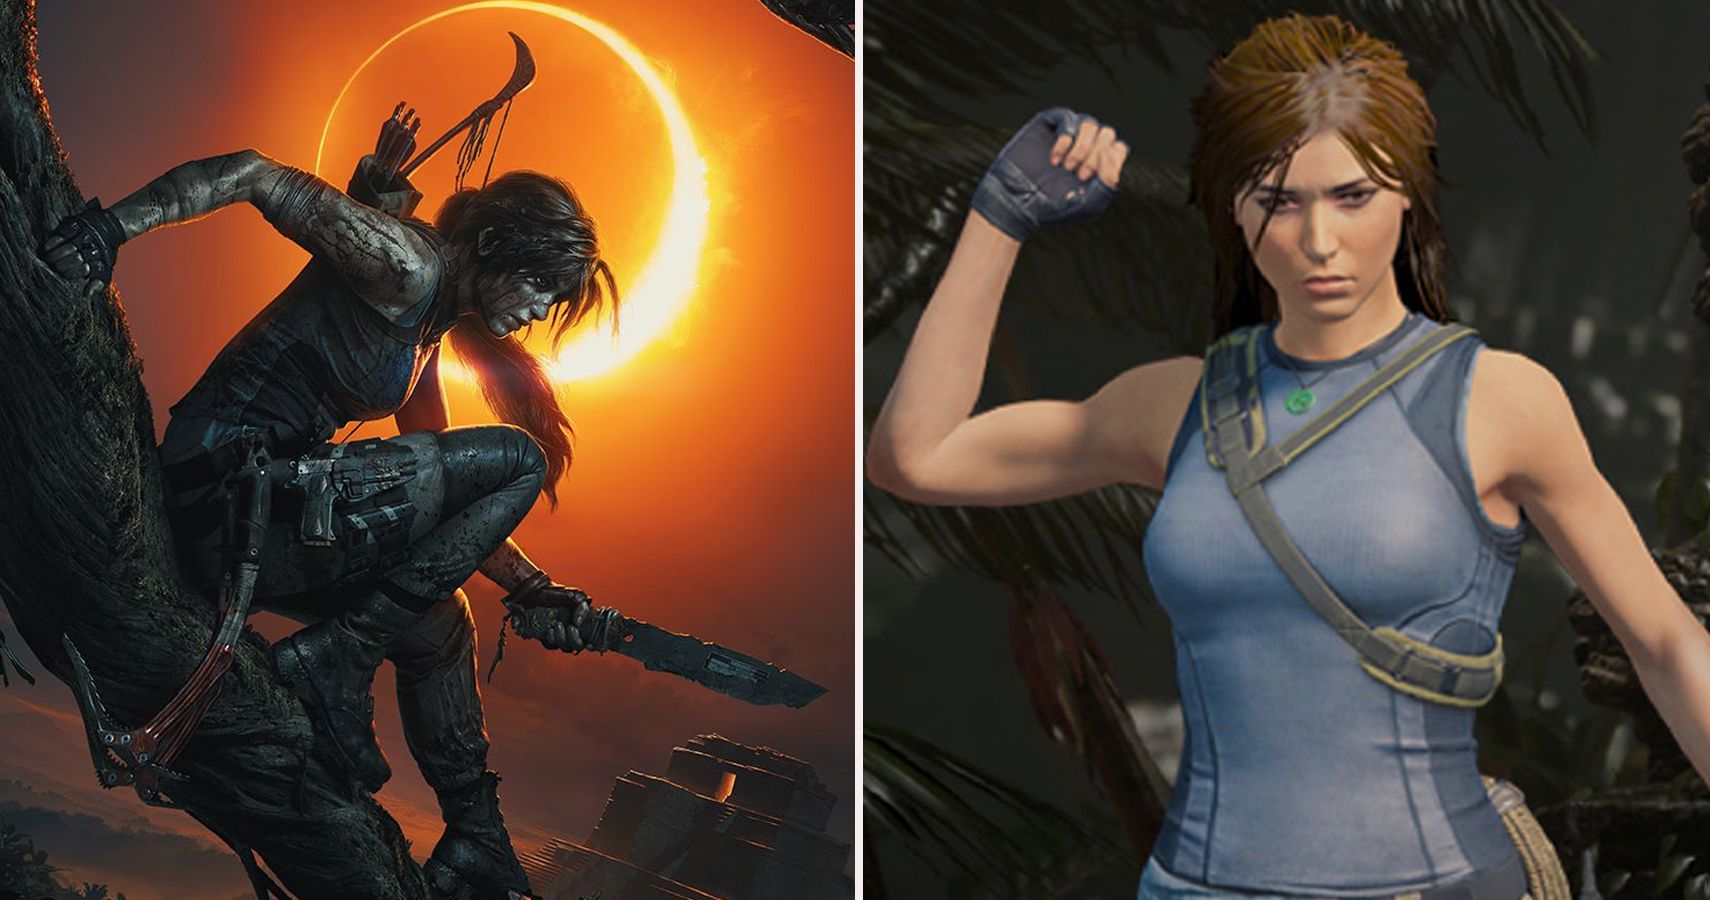 shadow of the tomb raider tv tropes